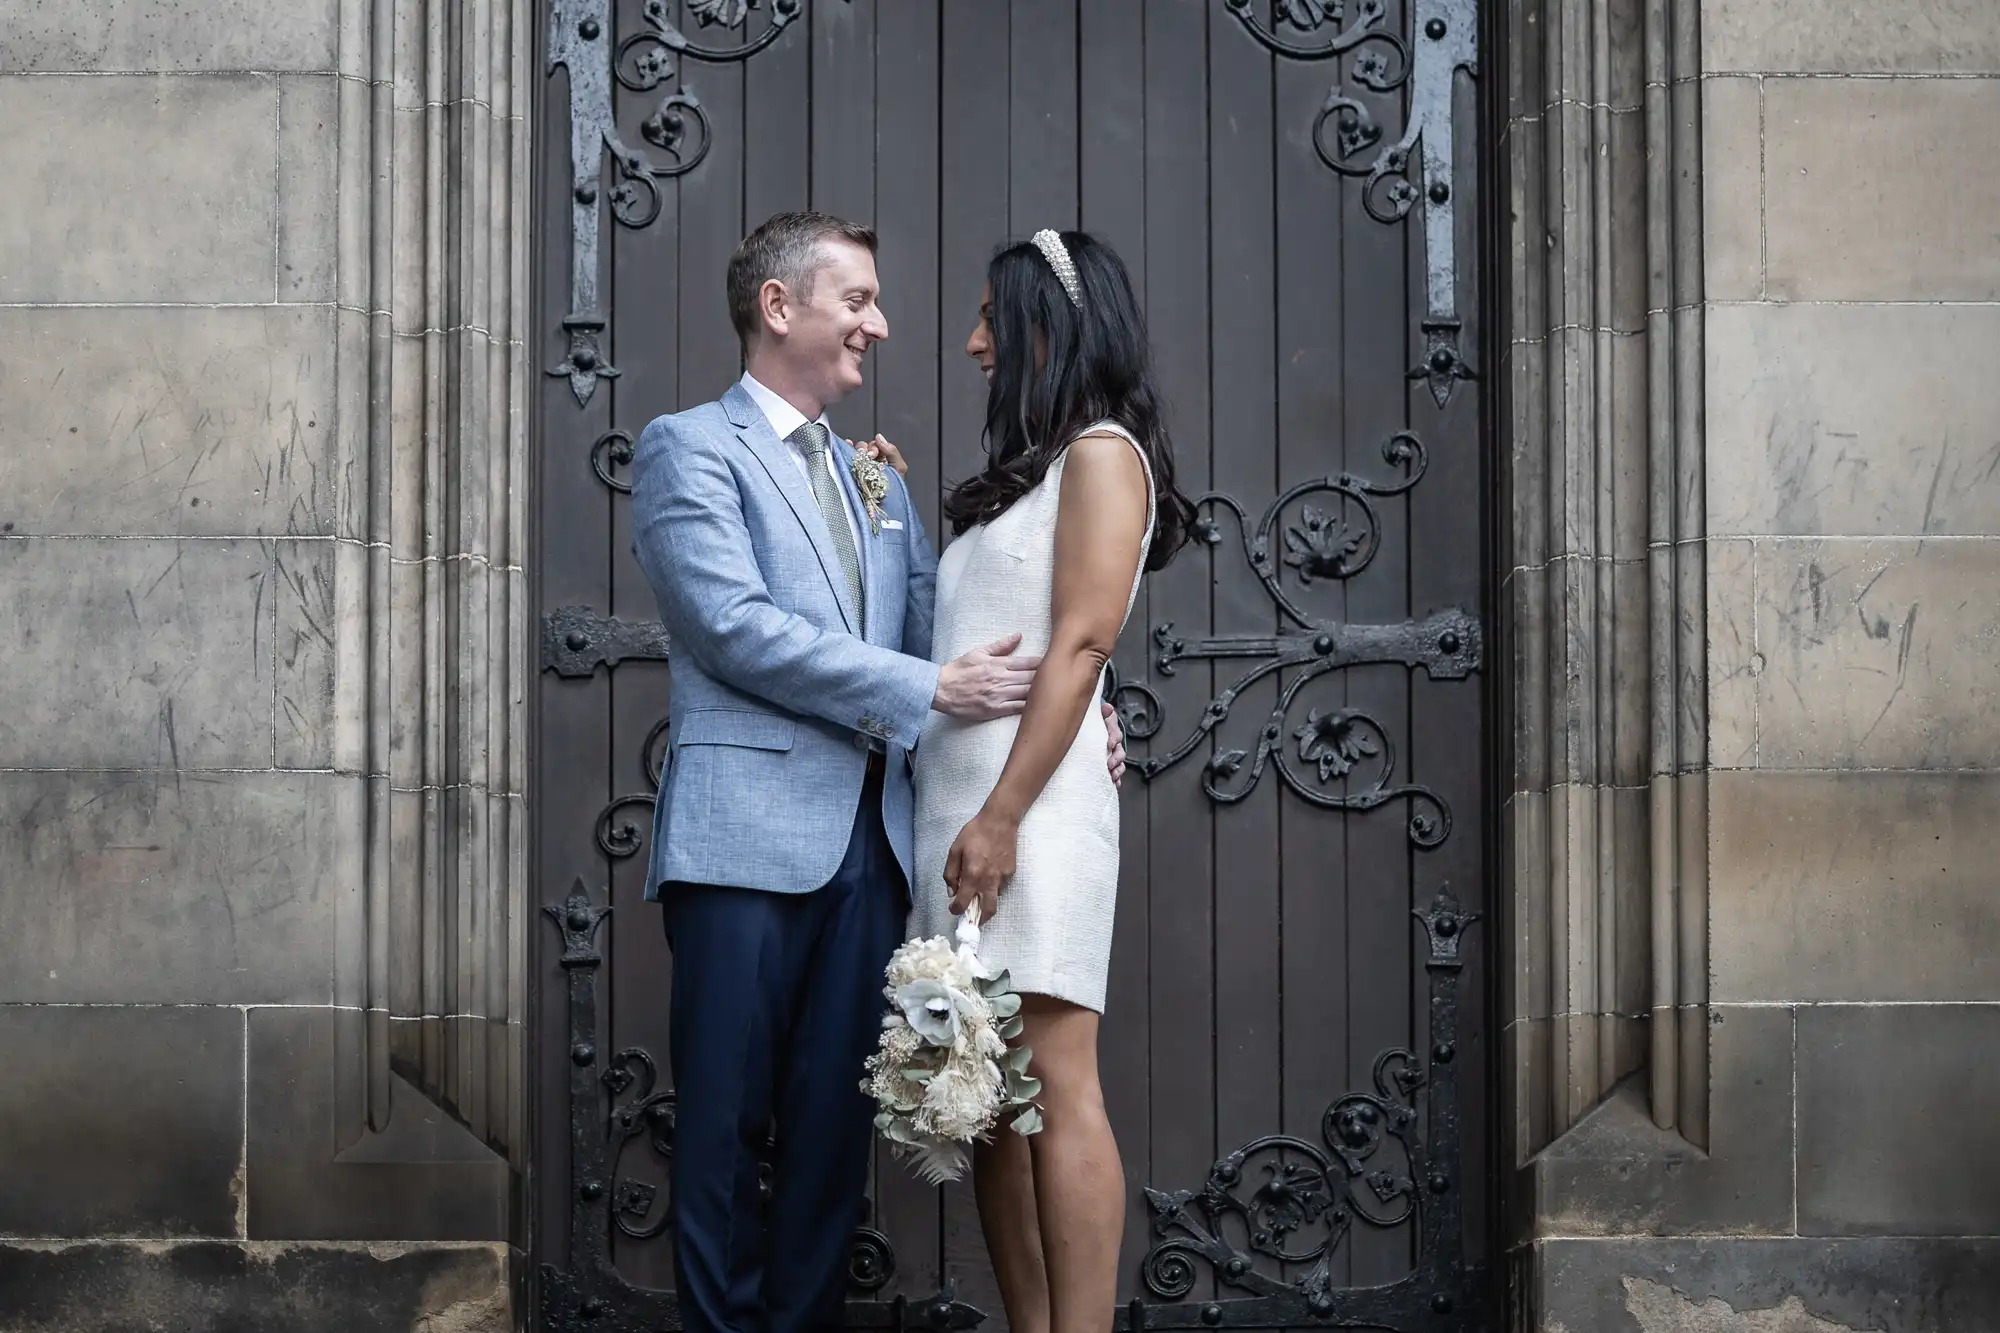 A couple stands facing each other in front of a large wooden door with intricate metalwork. Both are dressed in formal attire; the woman holds a bouquet of flowers.